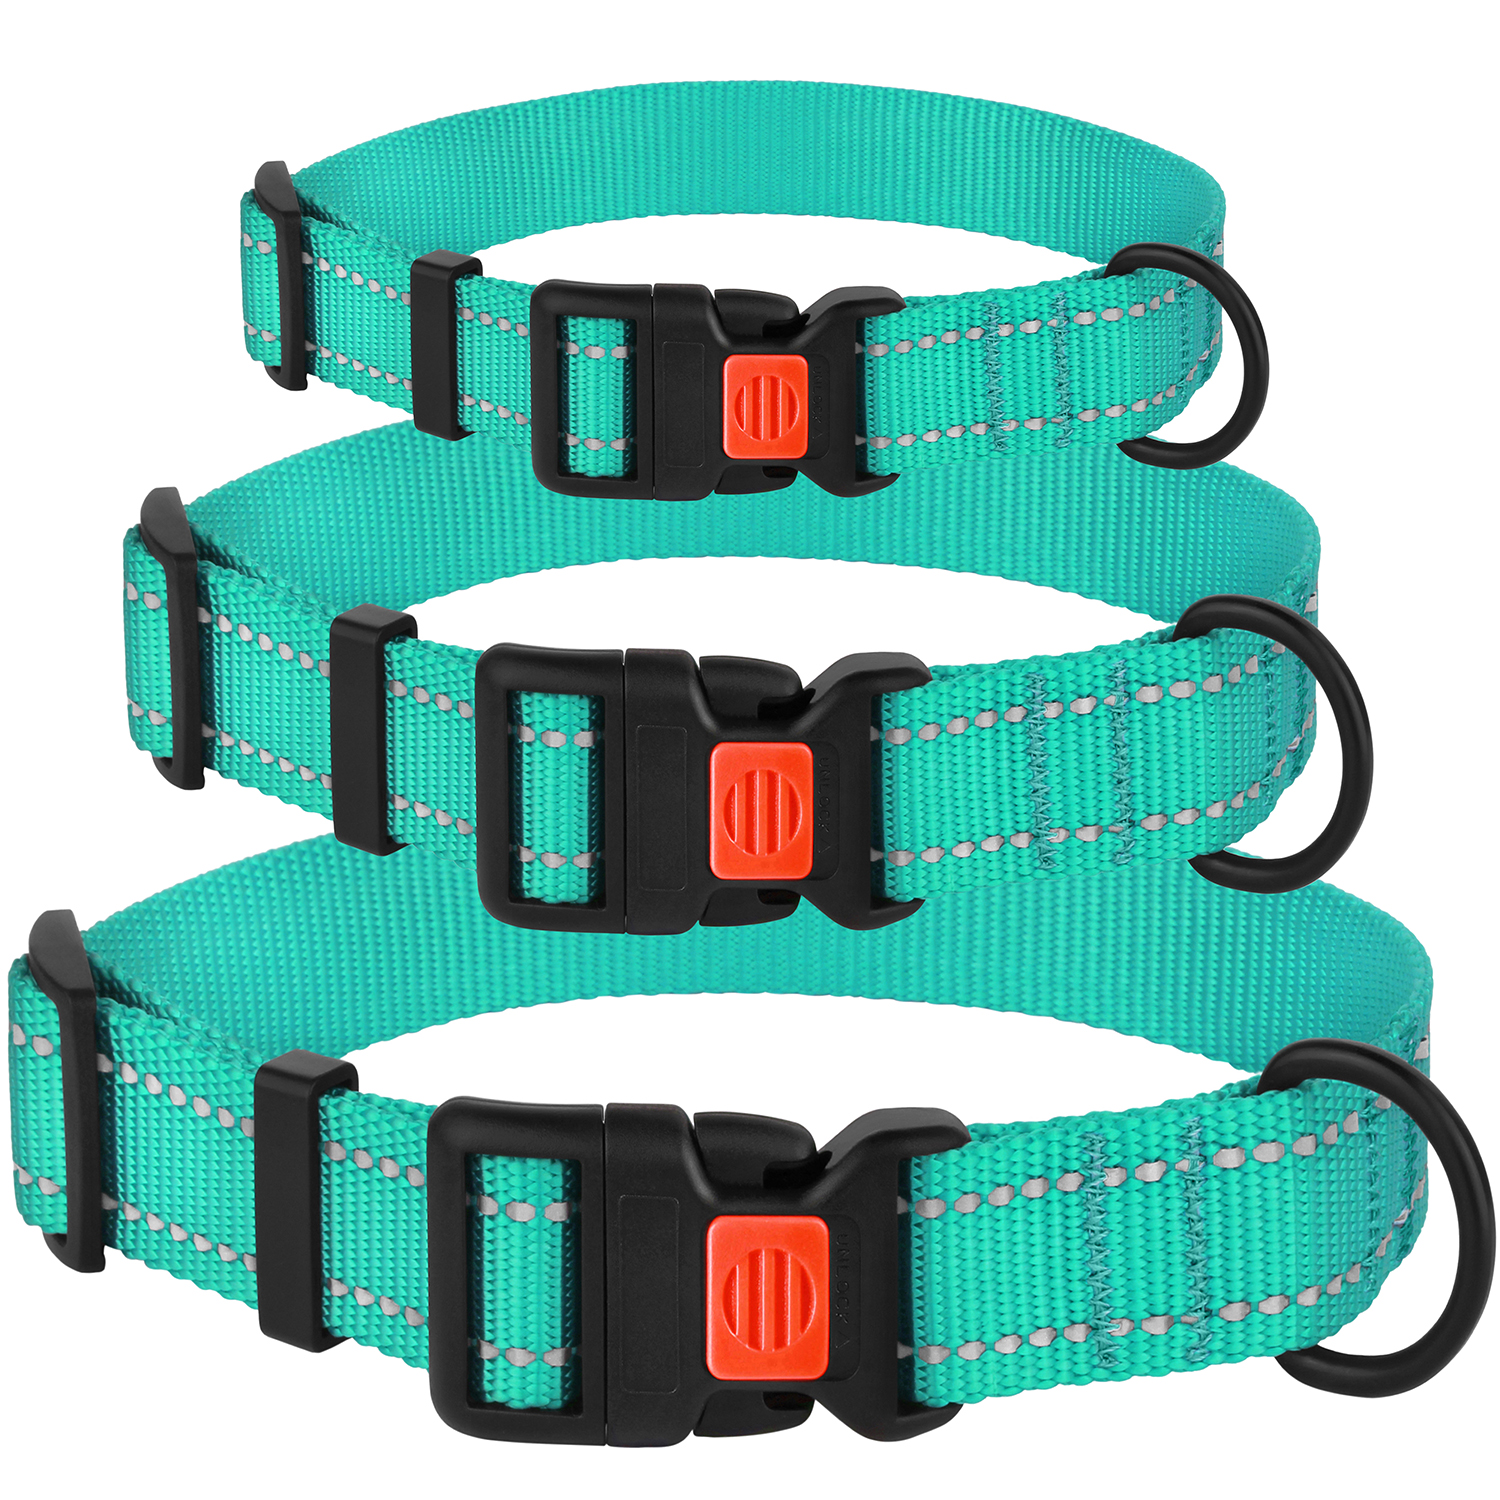 CollarDirect Reflective Dog Collar Safety Nylon Collars for Medium Dogs with Buckle, Mint Green - image 2 of 7